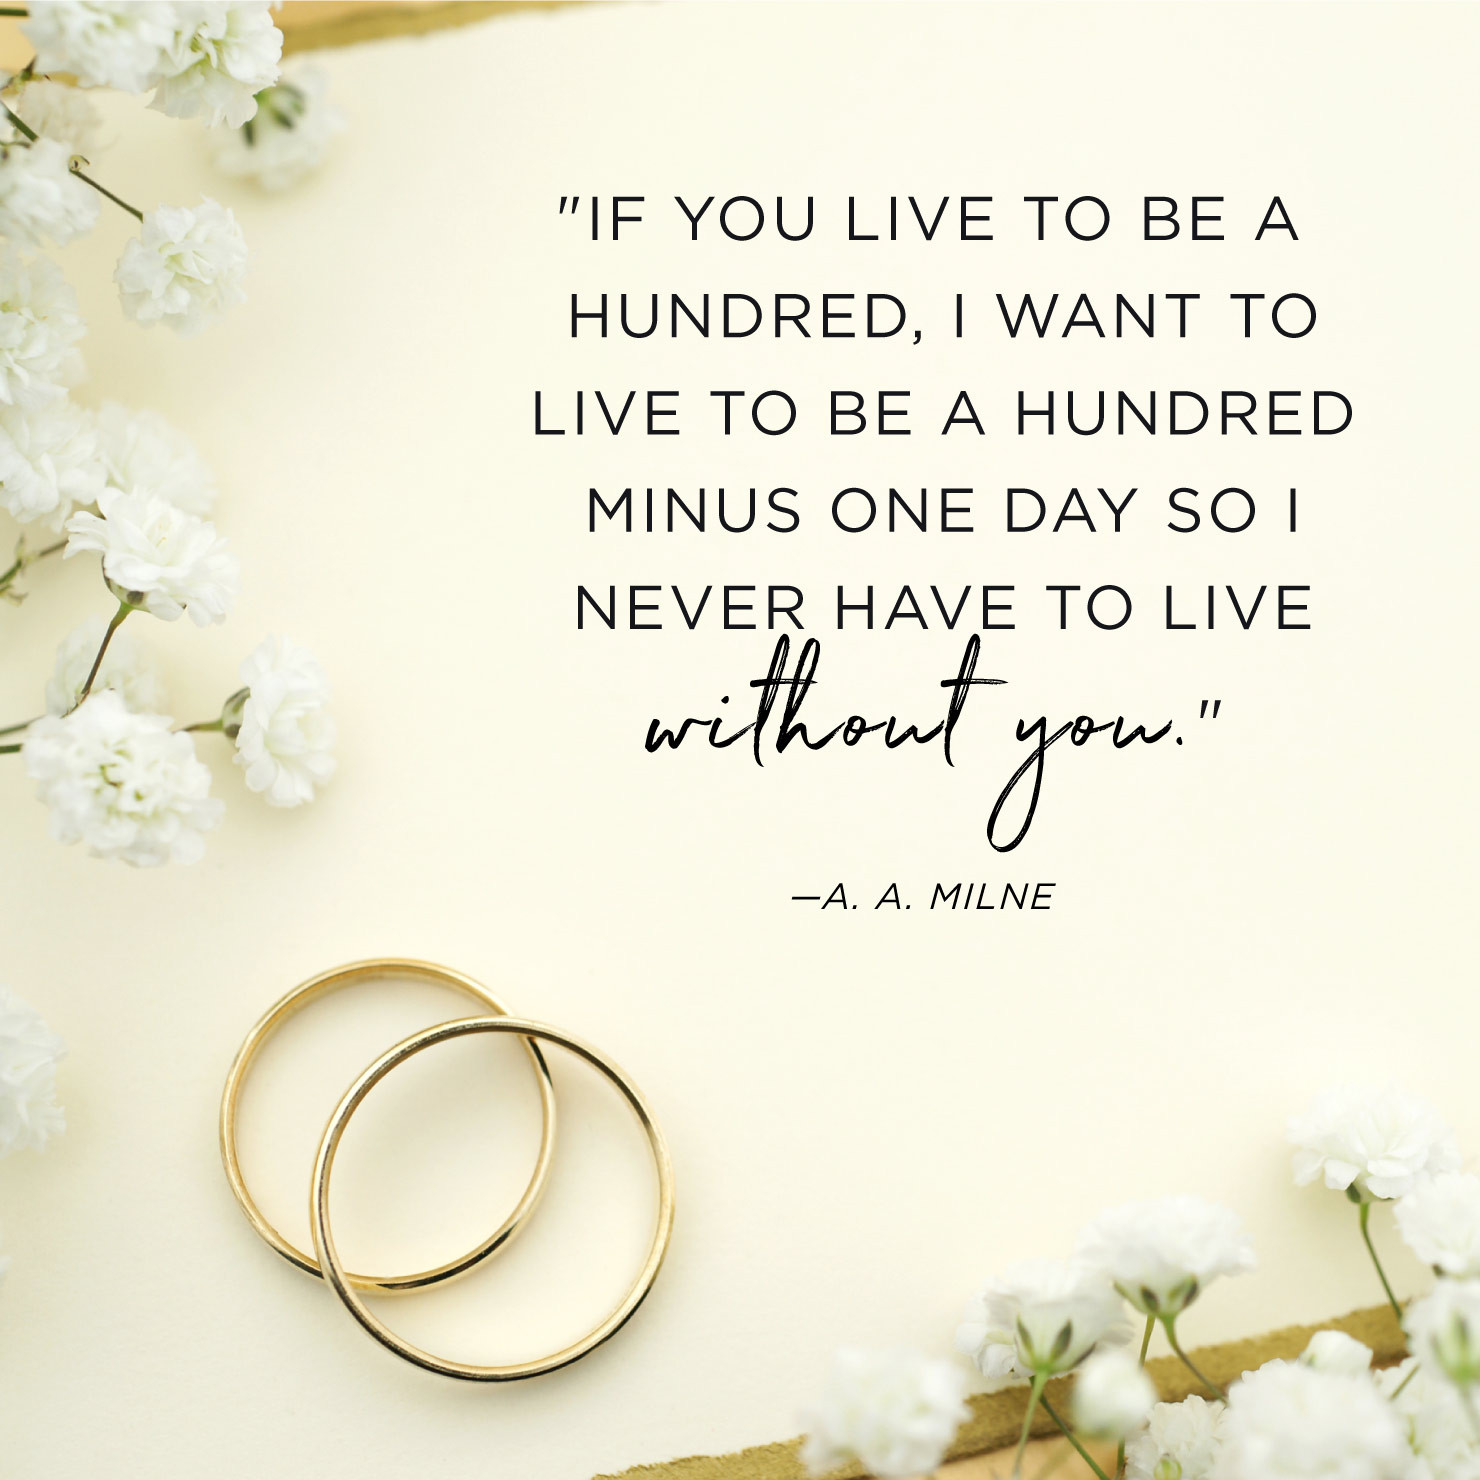 Happy Anniversary Quotes
 60 Happy Anniversary Quotes to Celebrate Your Love